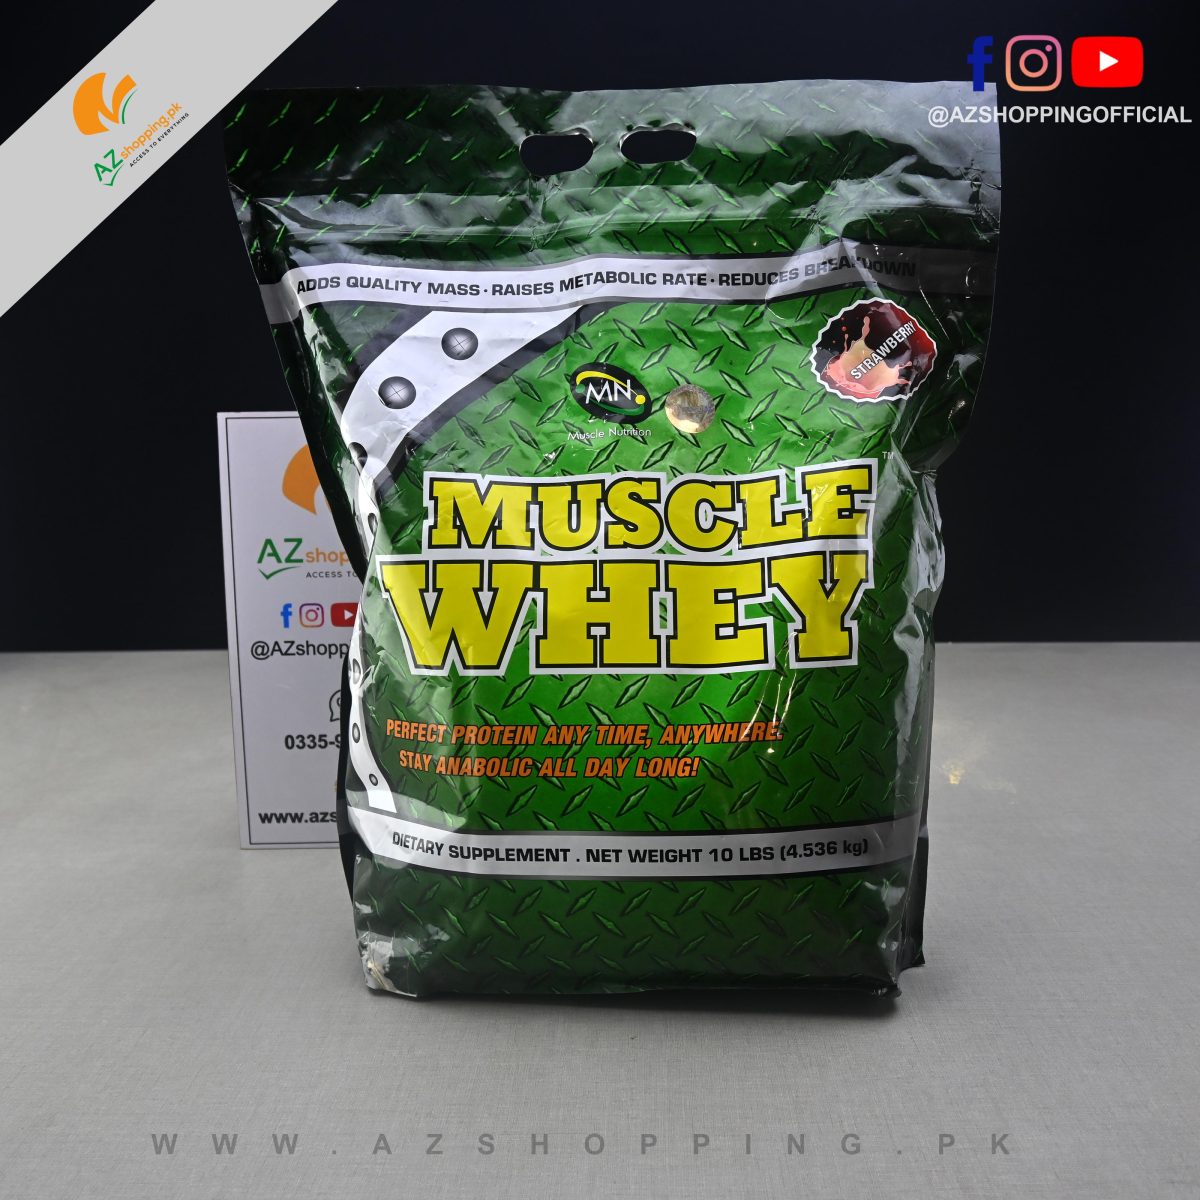 Muscle Nutrition – Muscle Whey – Net Weight. 10 Lbs (4.536 kg)